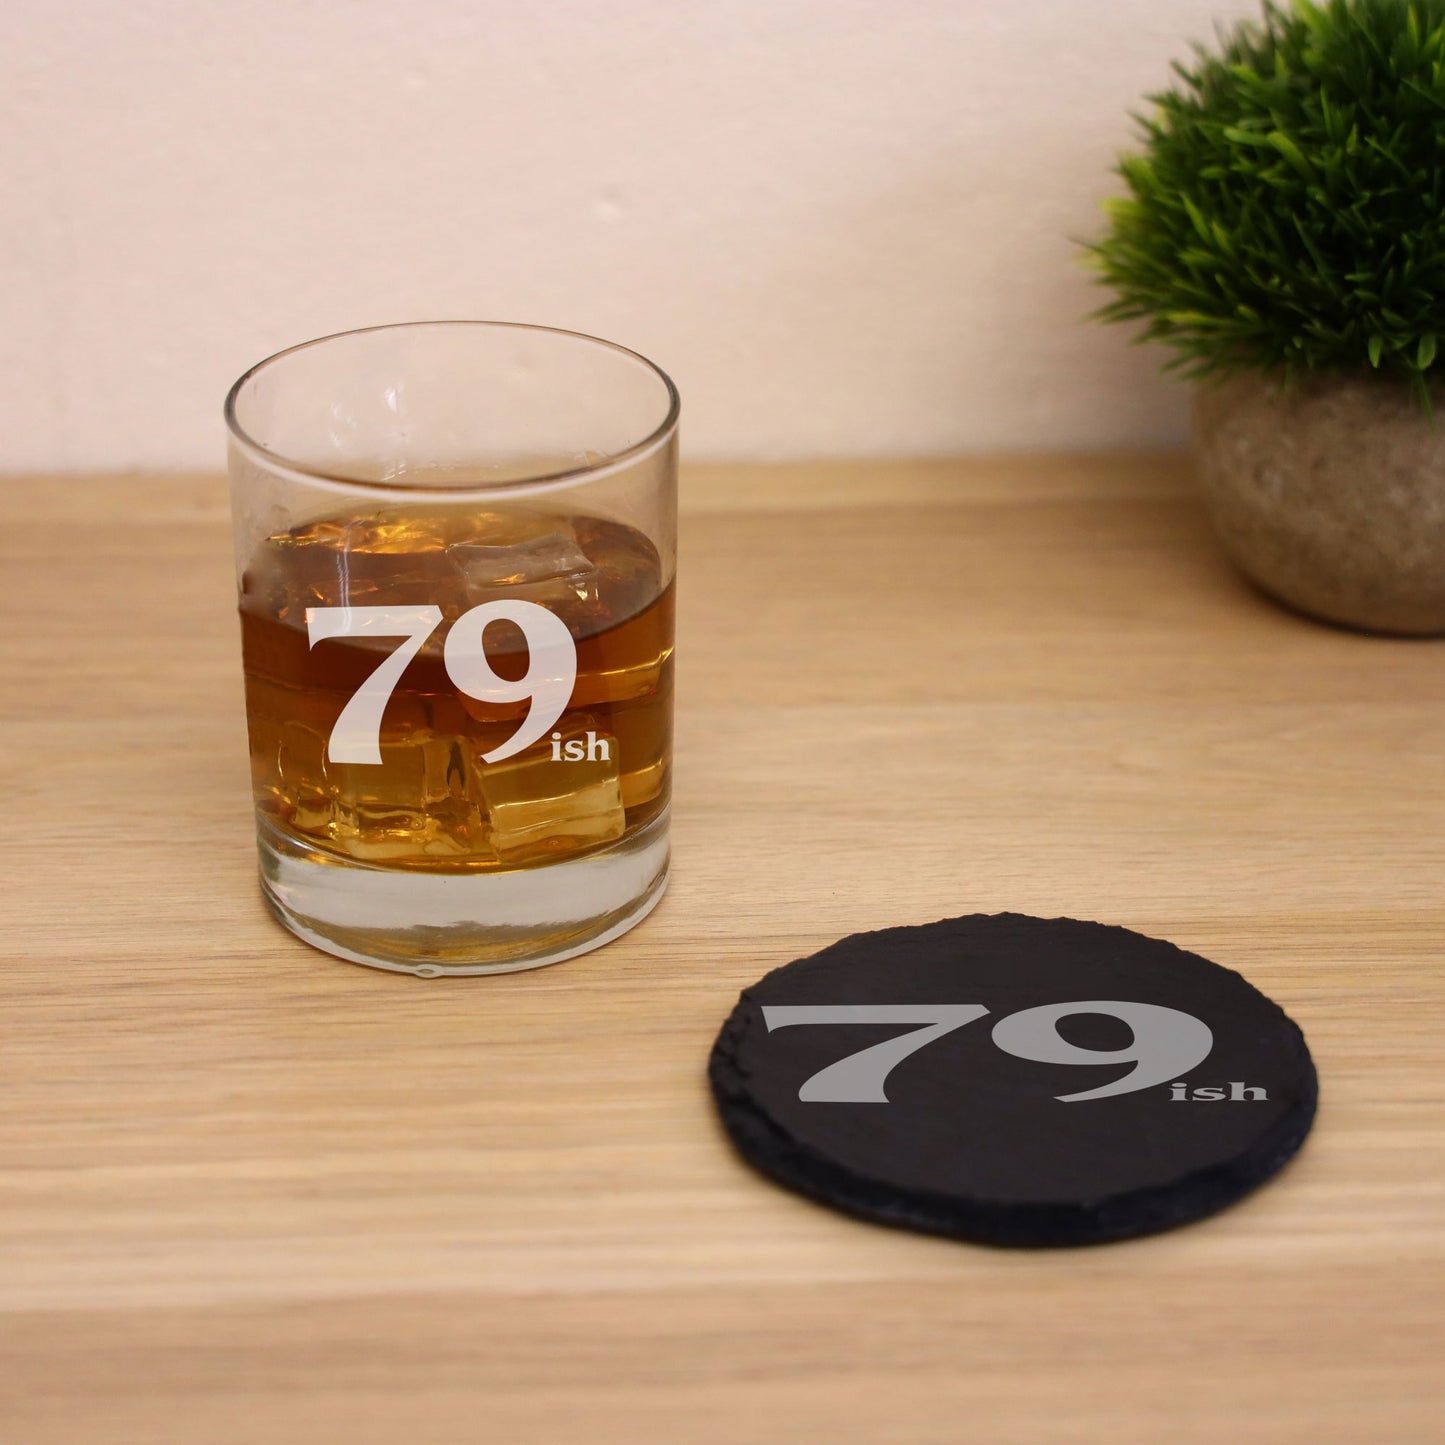 79ish Whisky Glass and/or Coaster Set  - Always Looking Good - Glass & Round Coaster Set  